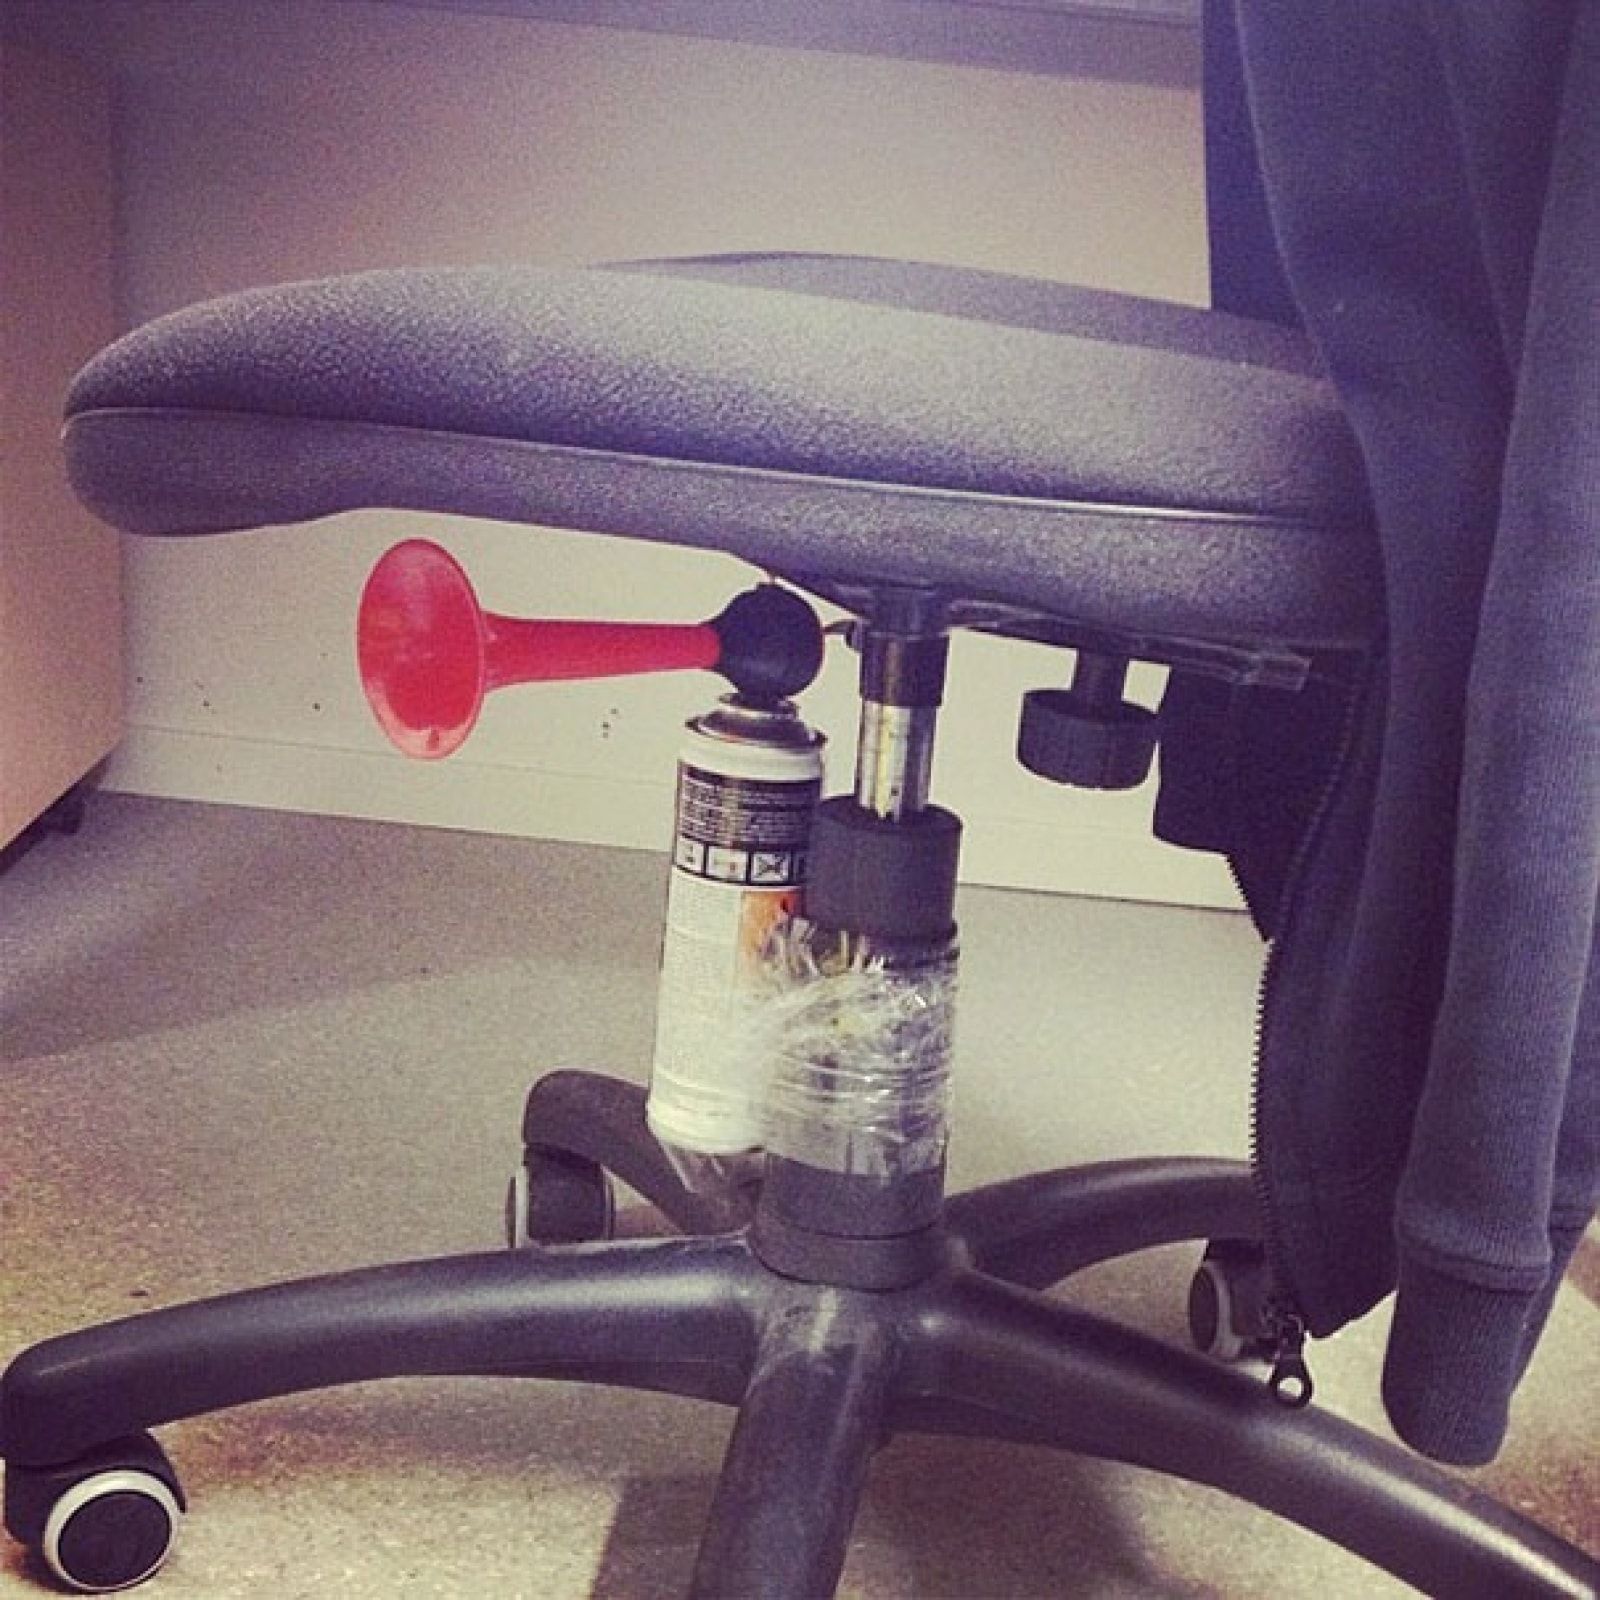 21 of the best office tech pranks of all time image 2